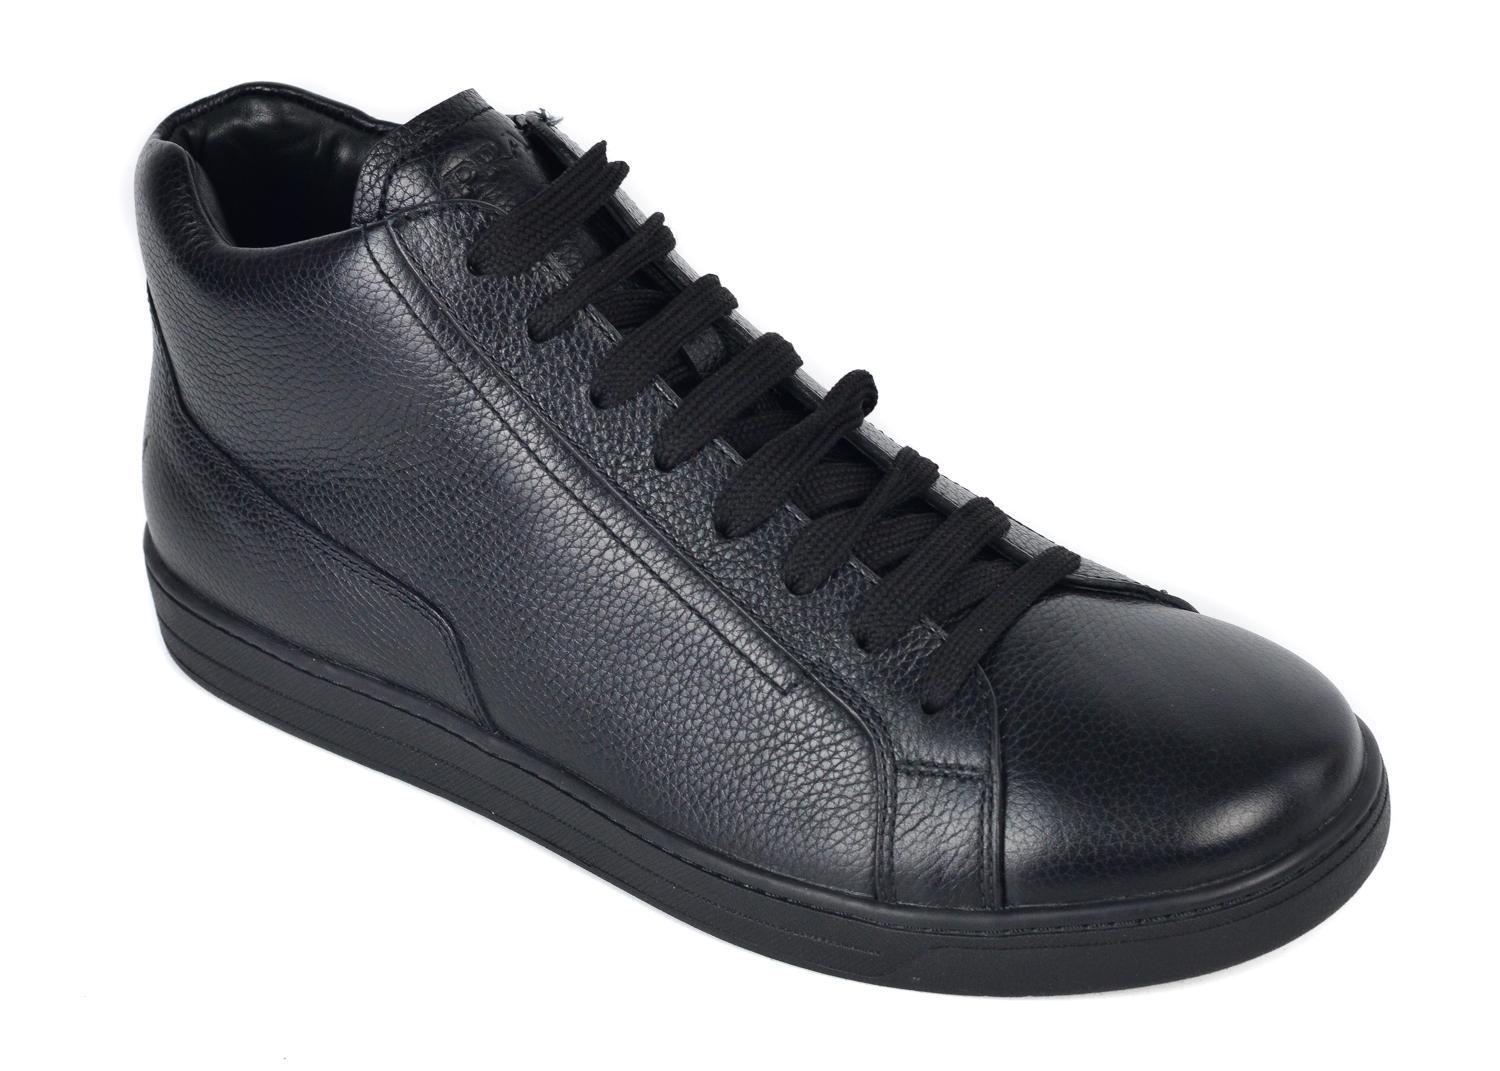 Prada is known for high quality Italian crafted leather all across the world. Add these high top sneakers to your wardrobe and compliment your globe. These sneakers feature rich polished grained leather, tonal high top lace up closure, and smooth